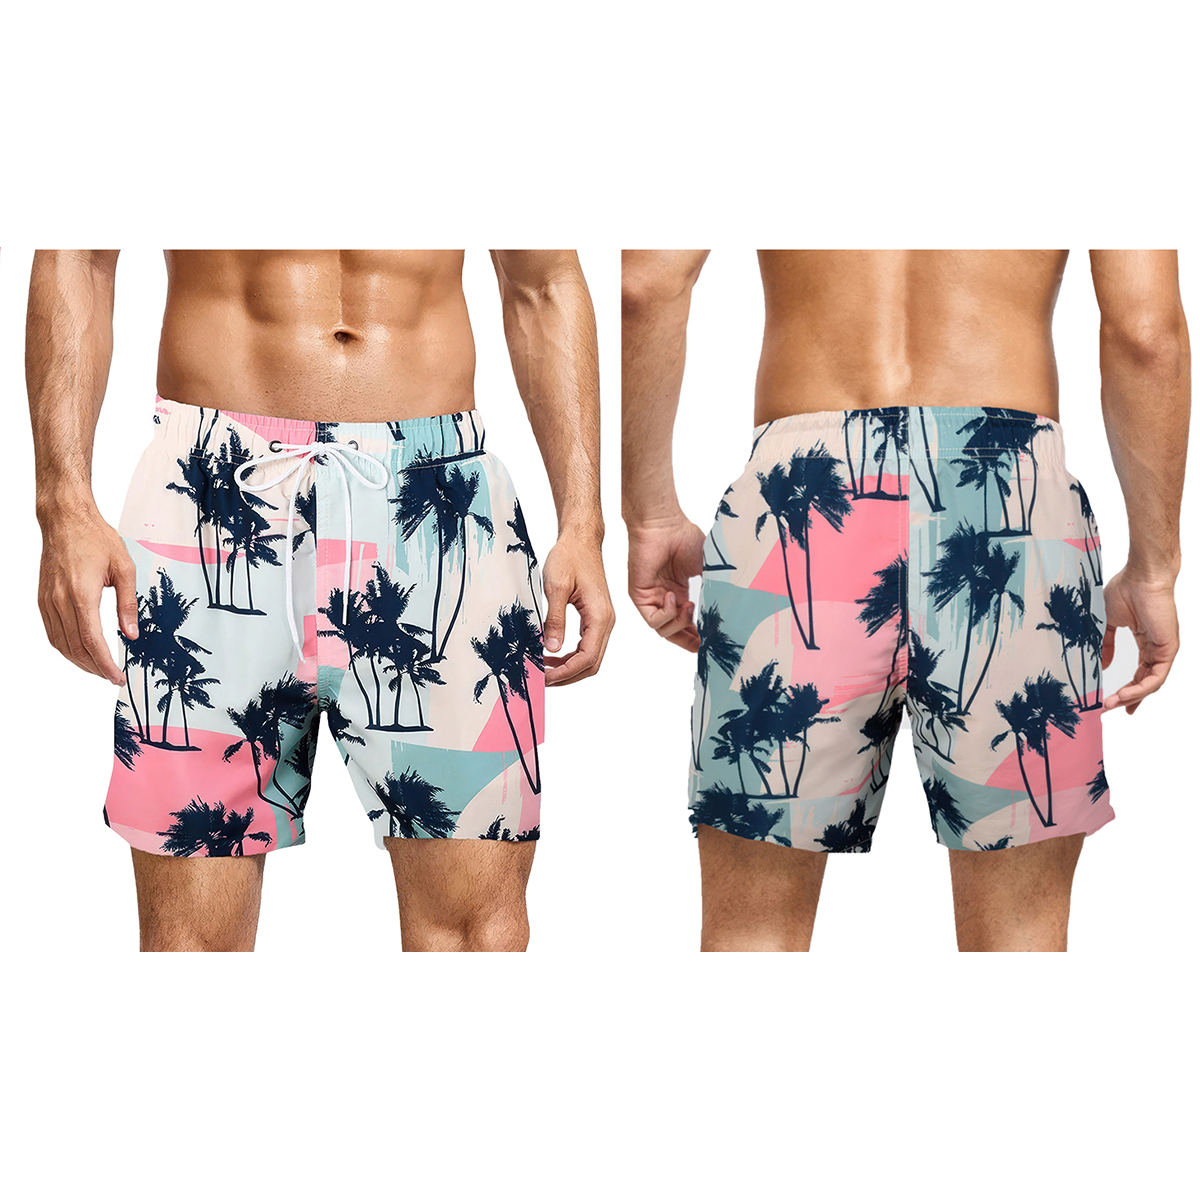 3-Pack: Men's Quick-Dry Solid & Printed Summer Beach Surf Board Swim Trunks Shorts - X-Large, Printed